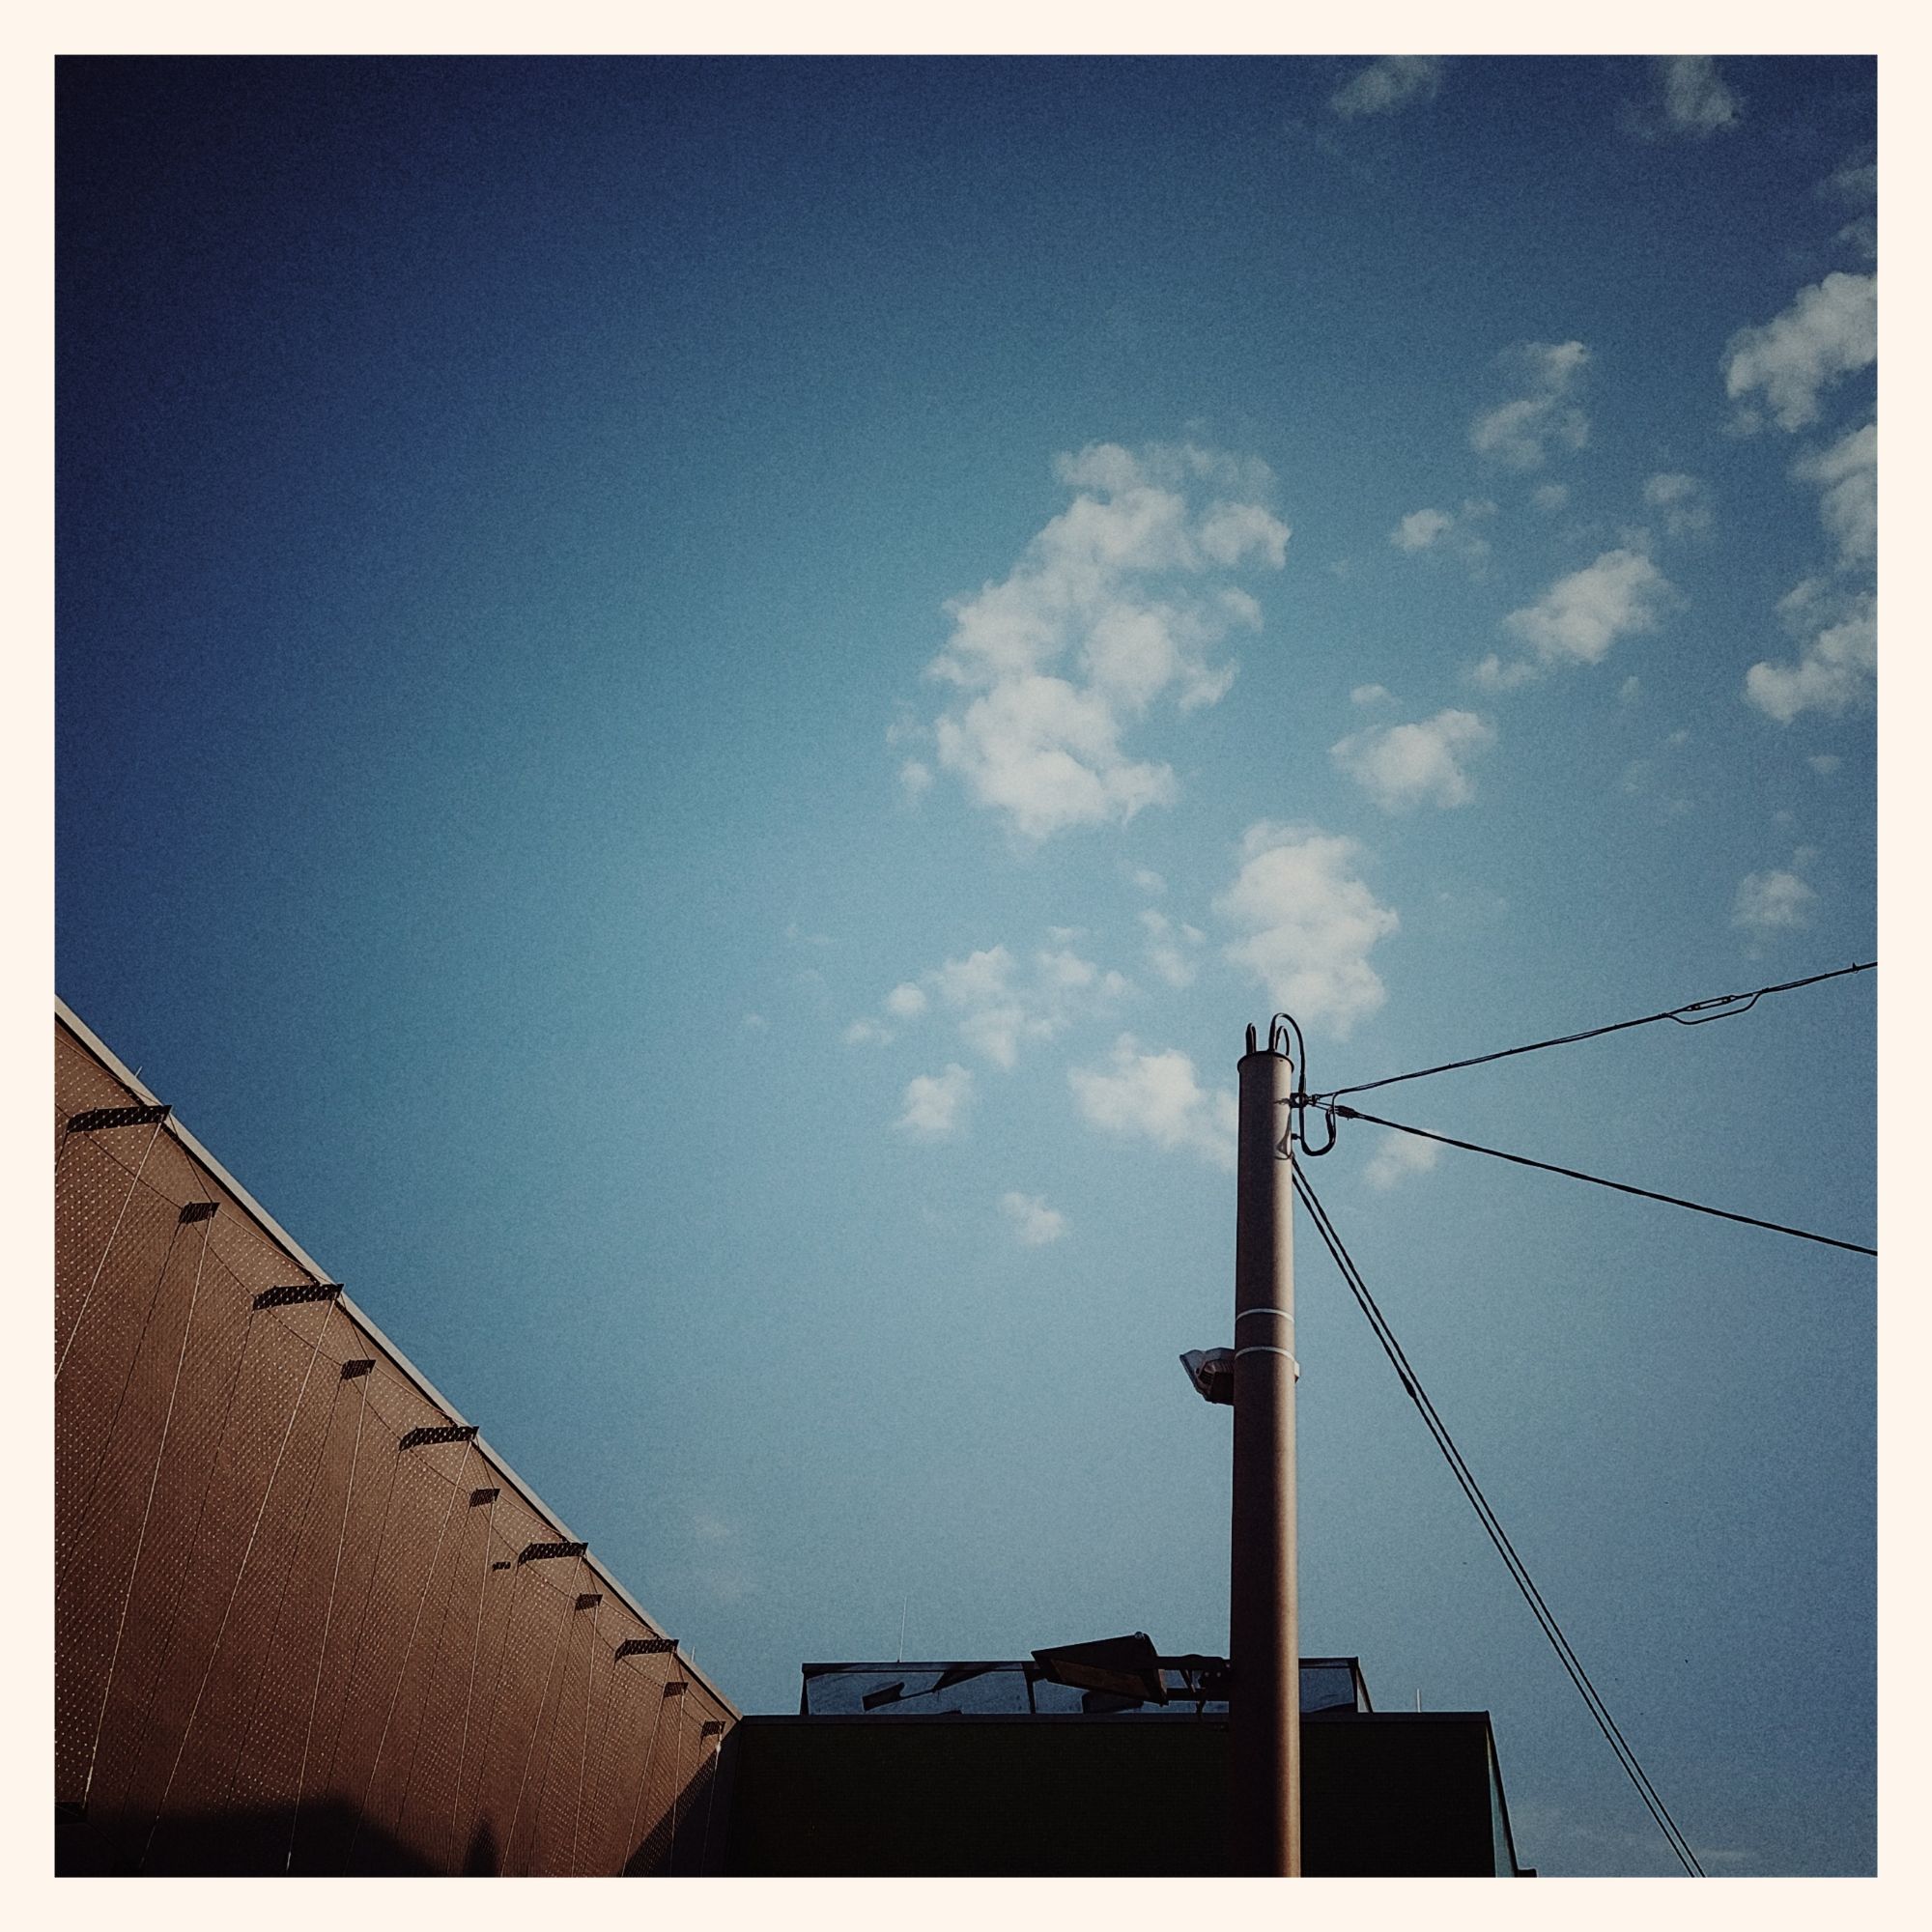 A quiet blue evening sky, some thin white clouds above an electric pylon and a concrete roof.